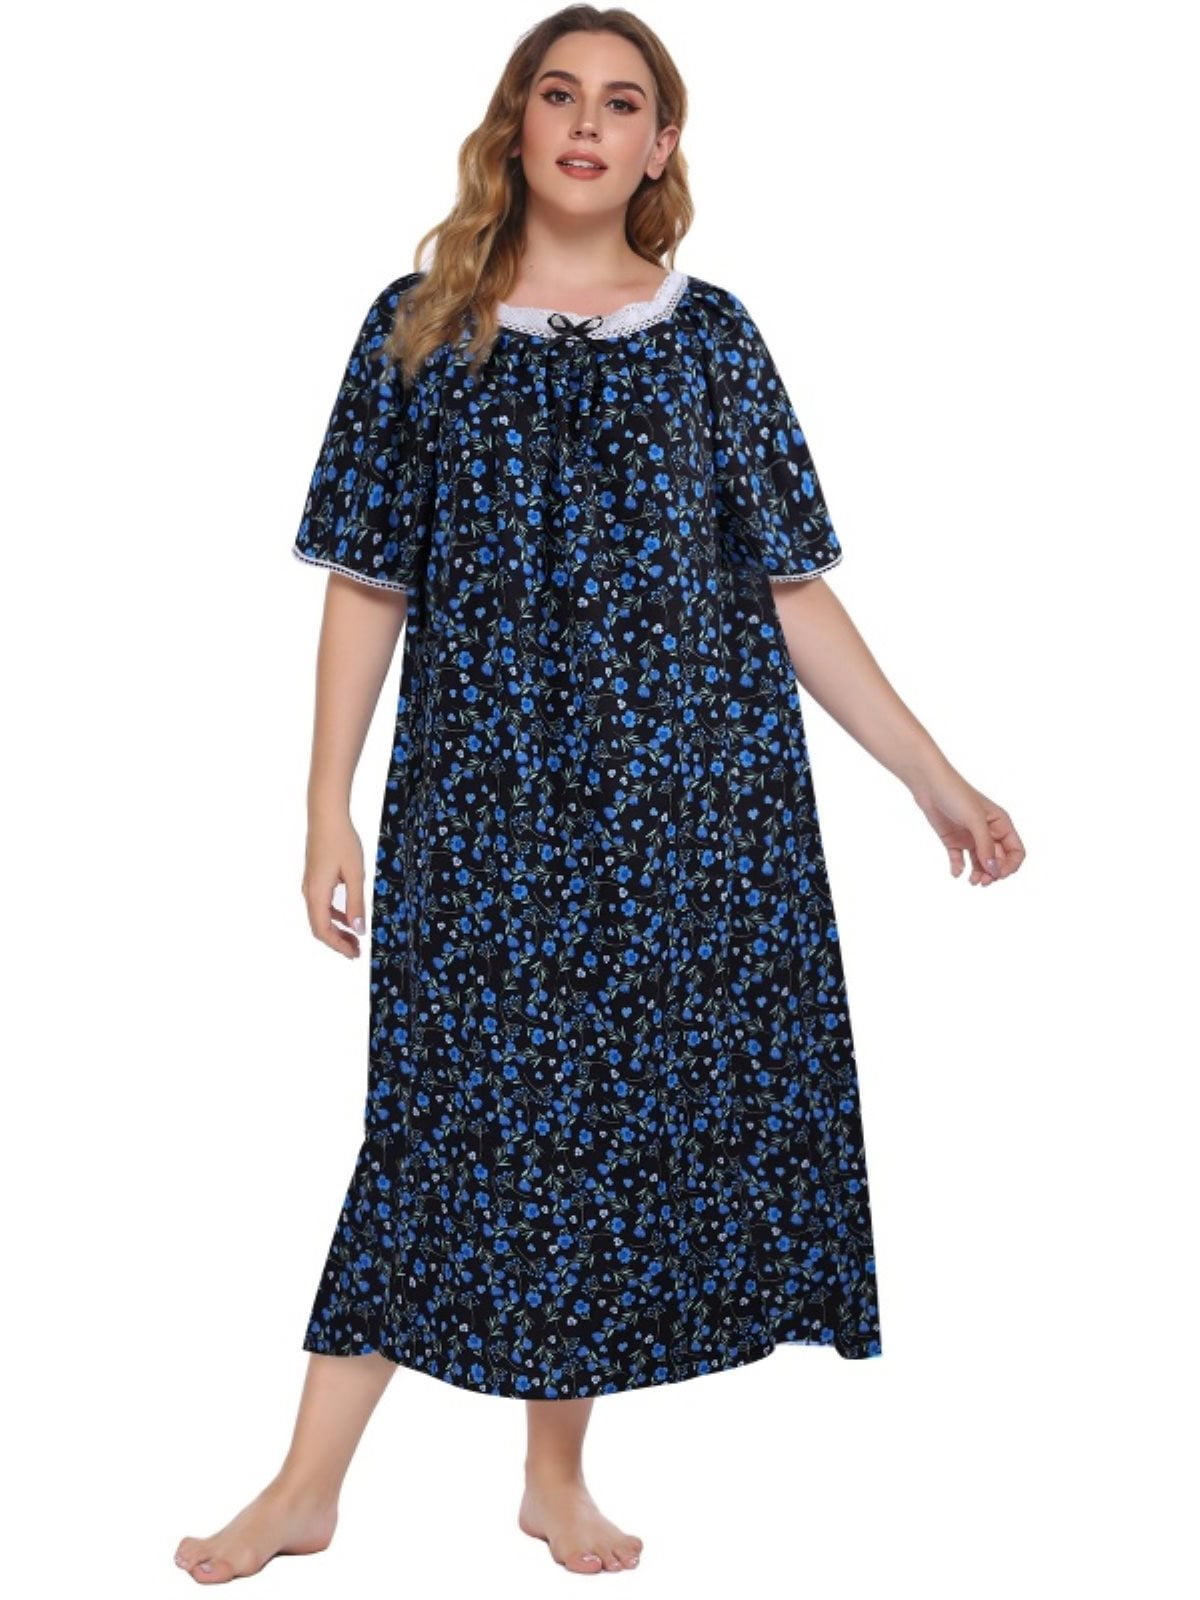 EFINNY Women's Plus Size Long Nightgowns Floral Print Short Sleeve Long ...